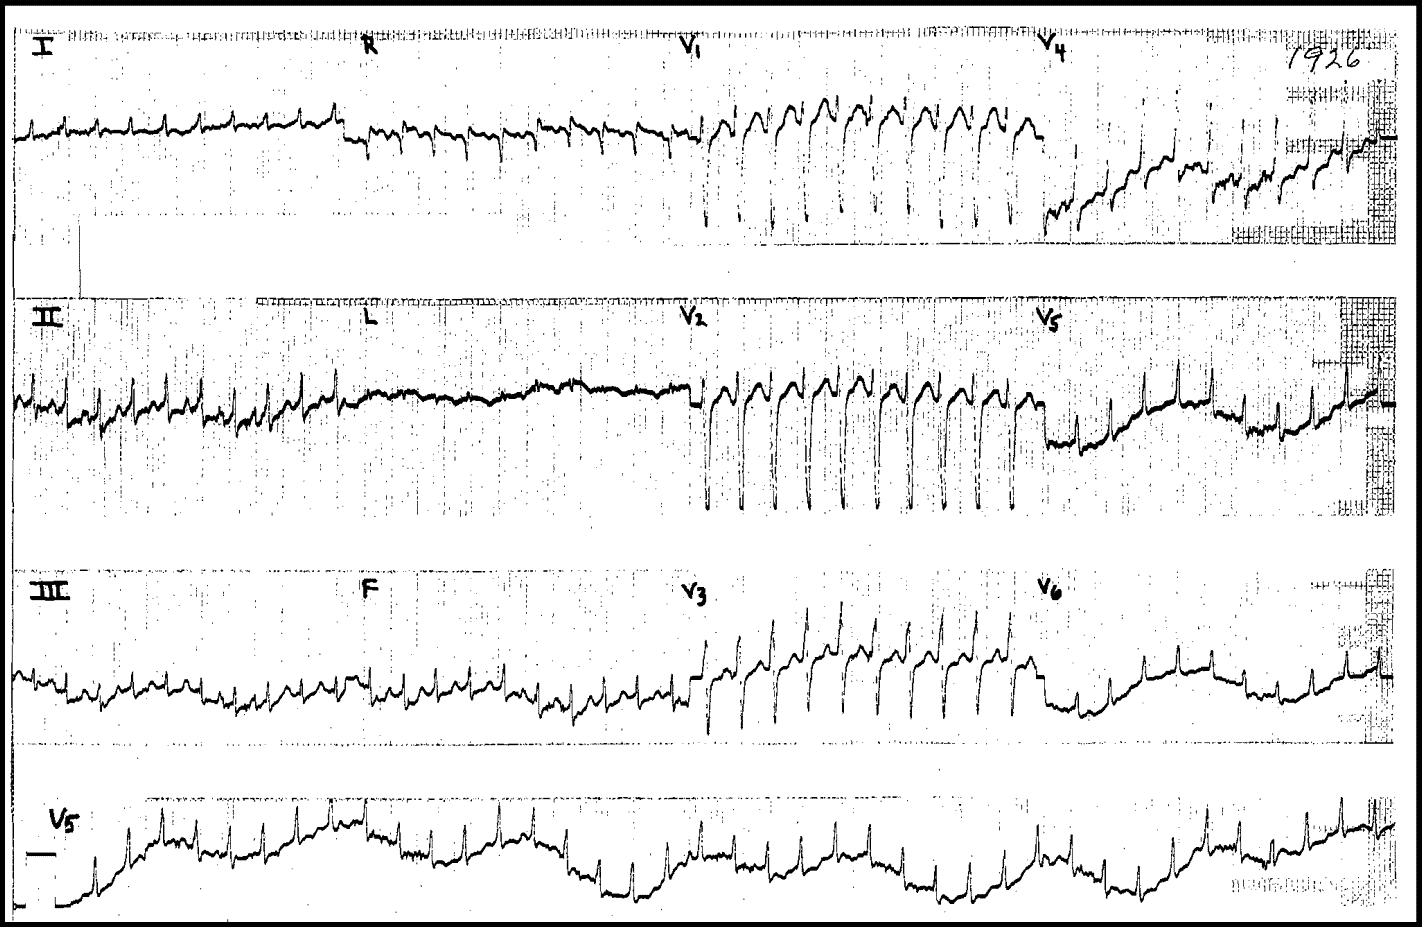 Atrial Flutter with 1:1 conduction